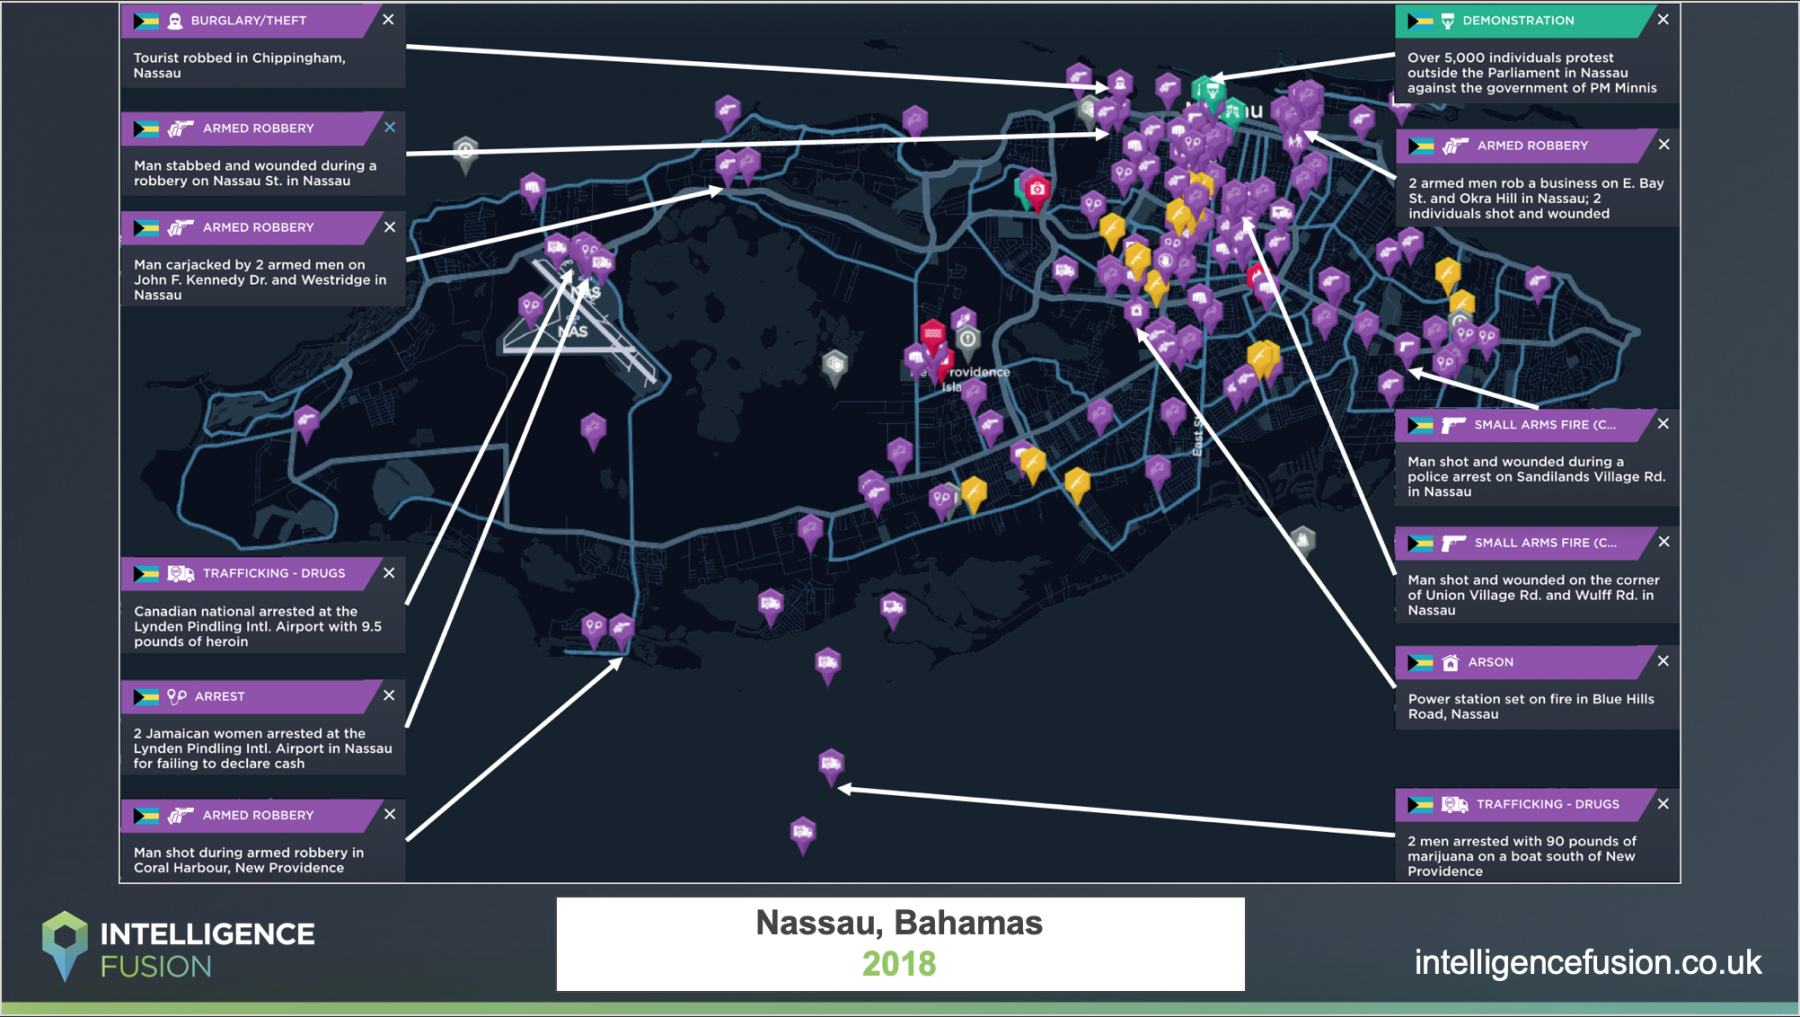 A map depicting the significant security incidents in Nassau, Bahamas